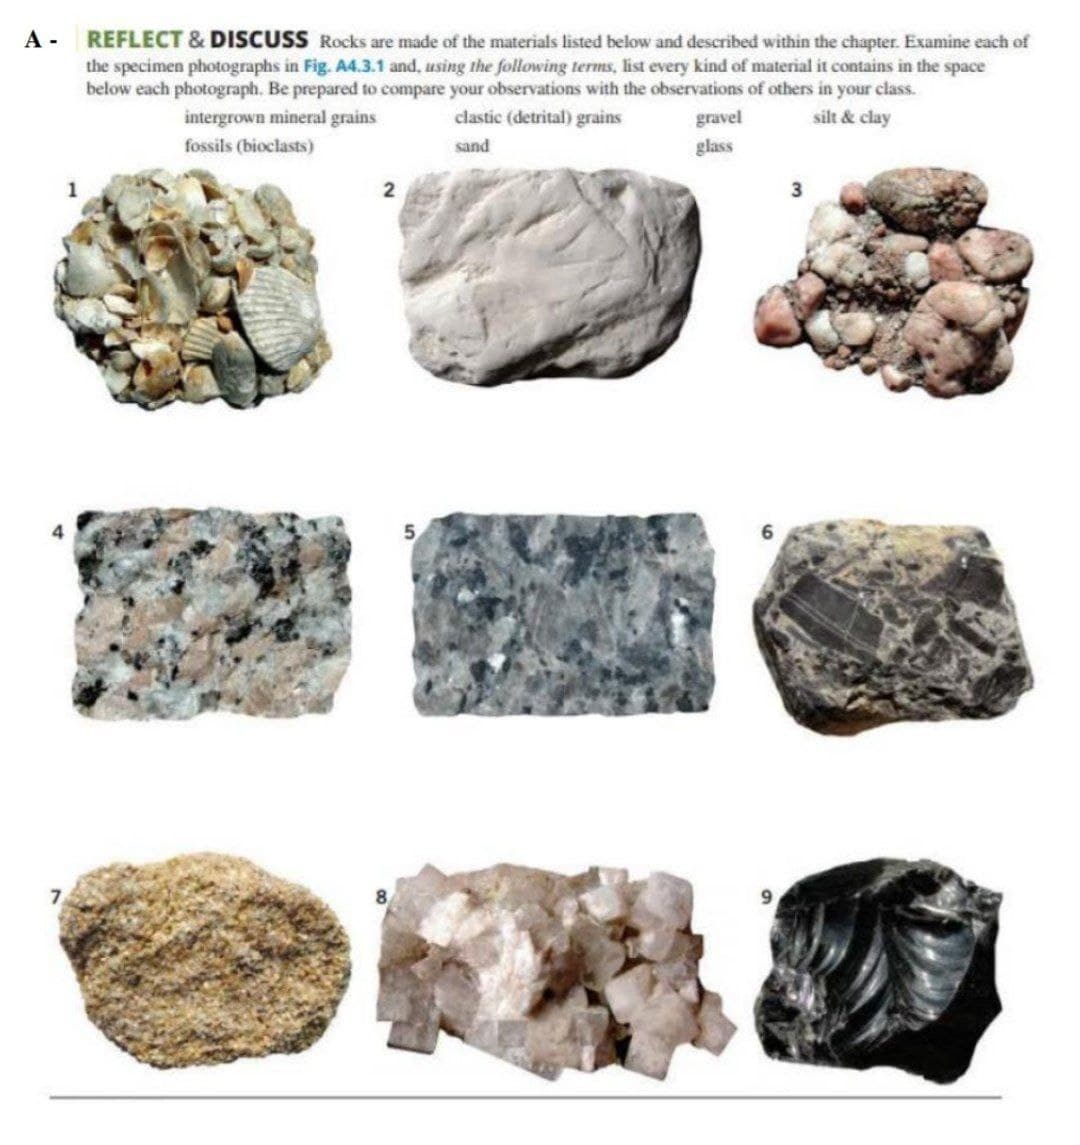 A - REFLECT & DISCUSS Rocks are made of the materials listed below and described within the chapter. Examine each of
the specimen photographs in Fig. A4.3.1 and, using the following terms, list every kind of material it contains in the space
below each photograph. Be prepared to compare your observations with the observations of others in your class.
intergrown mineral grains
clastic (detrital) grains
gravel
silt & clay
fossils (bioclasts)
sand
glass
7
